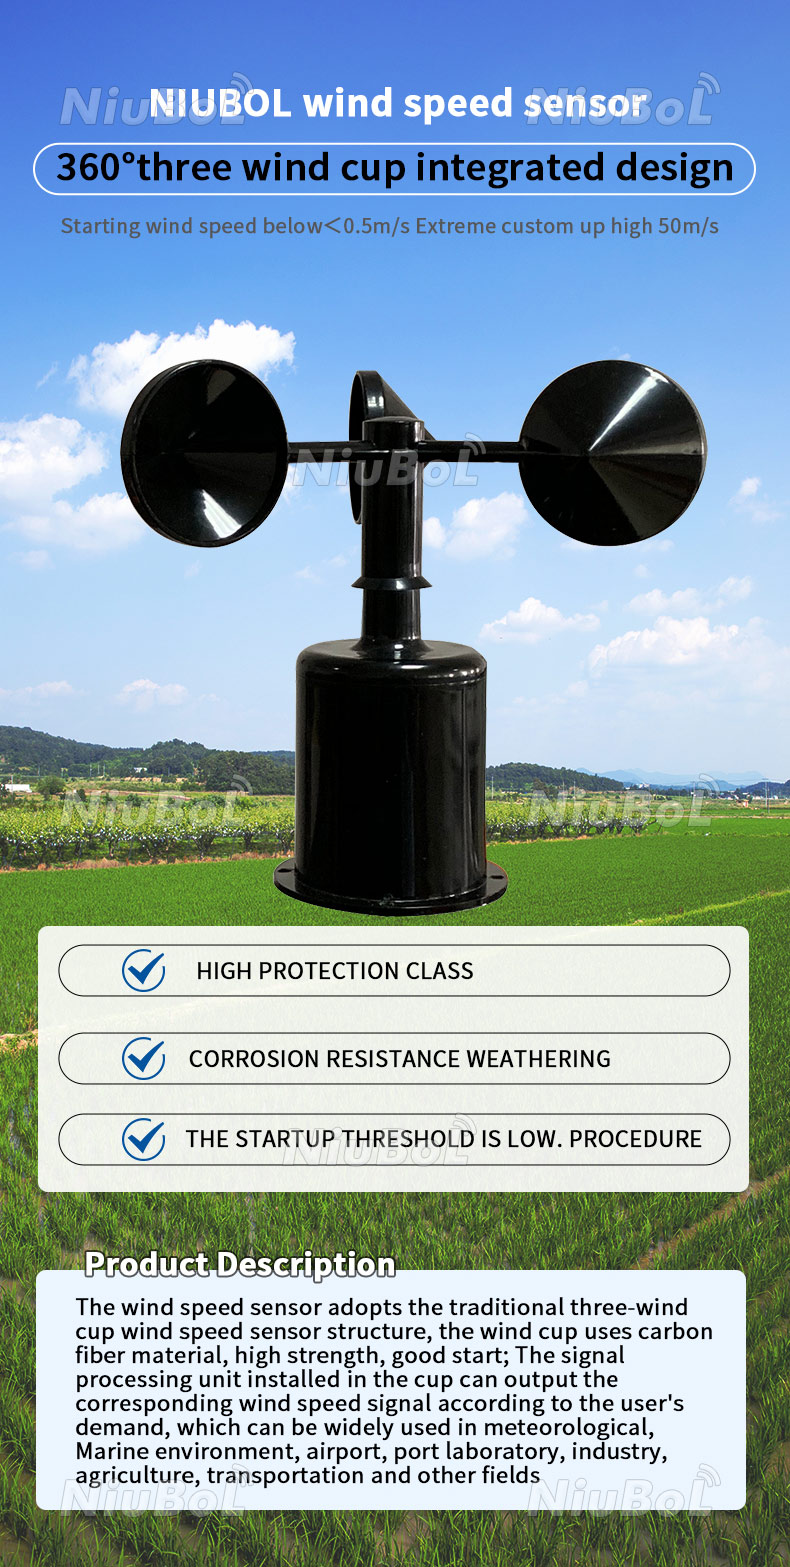 Advantages of anemometers in measuring wind speed include